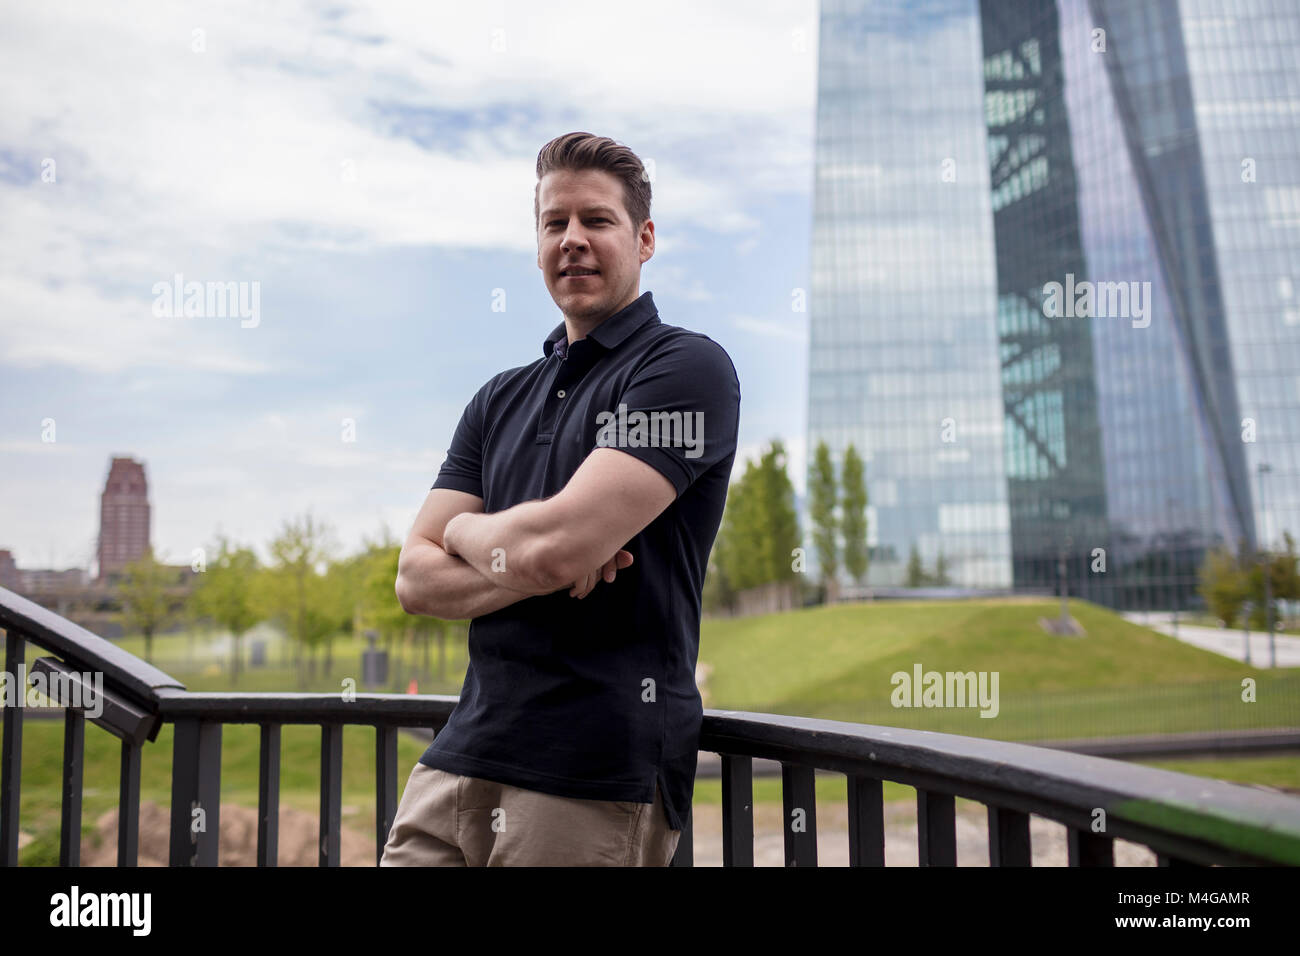 A man standing with his arms crossed leaning on a balustrade and a skyscraper building in the background. Stock Photo